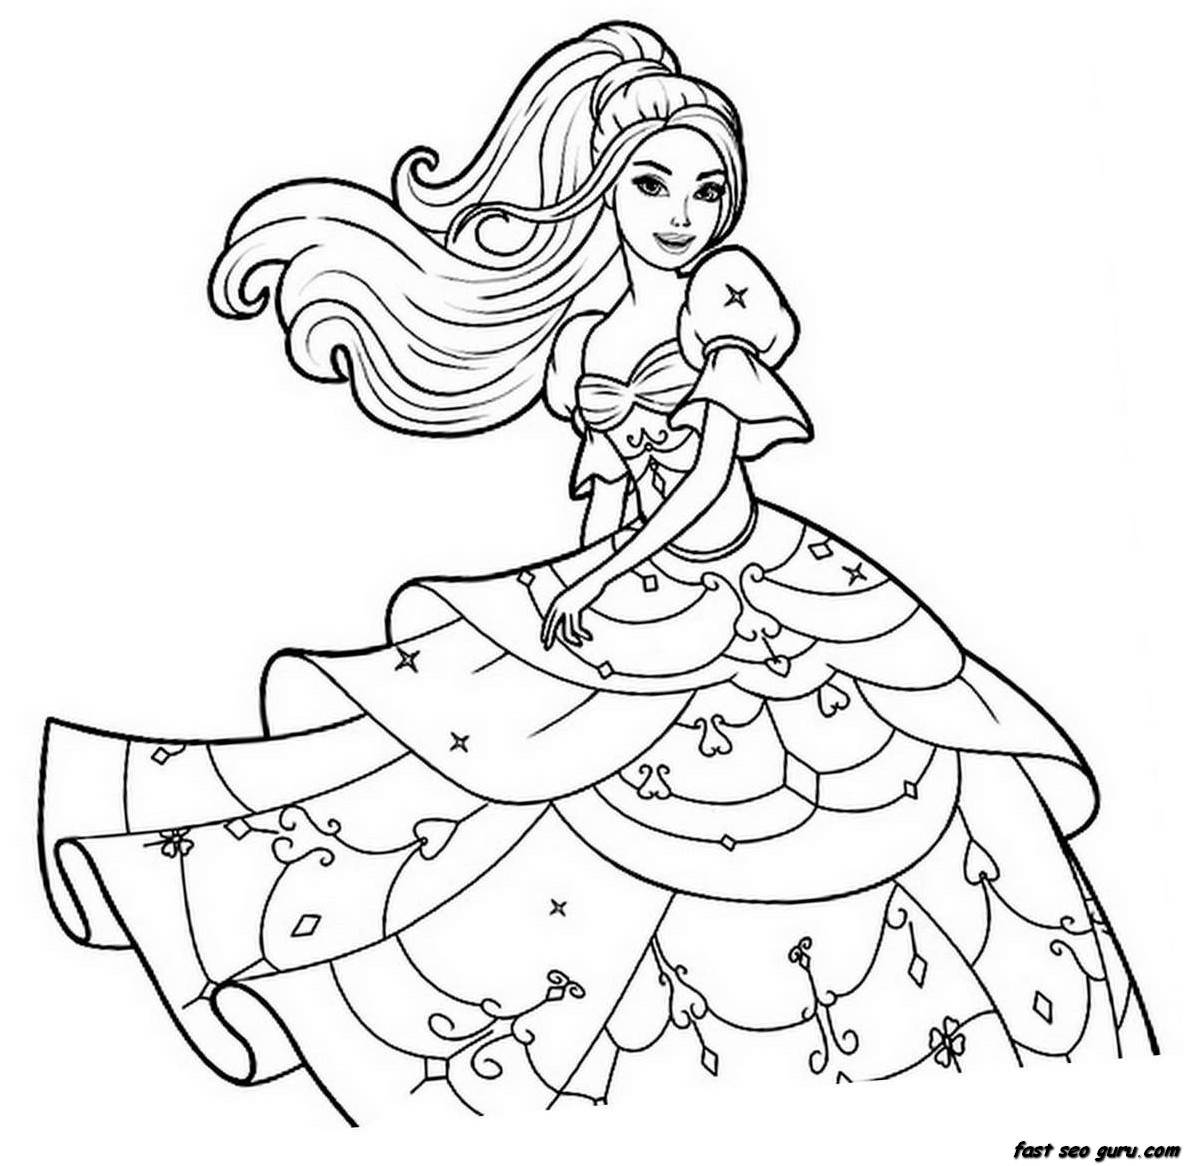  Girl Coloring Pages To Print 8